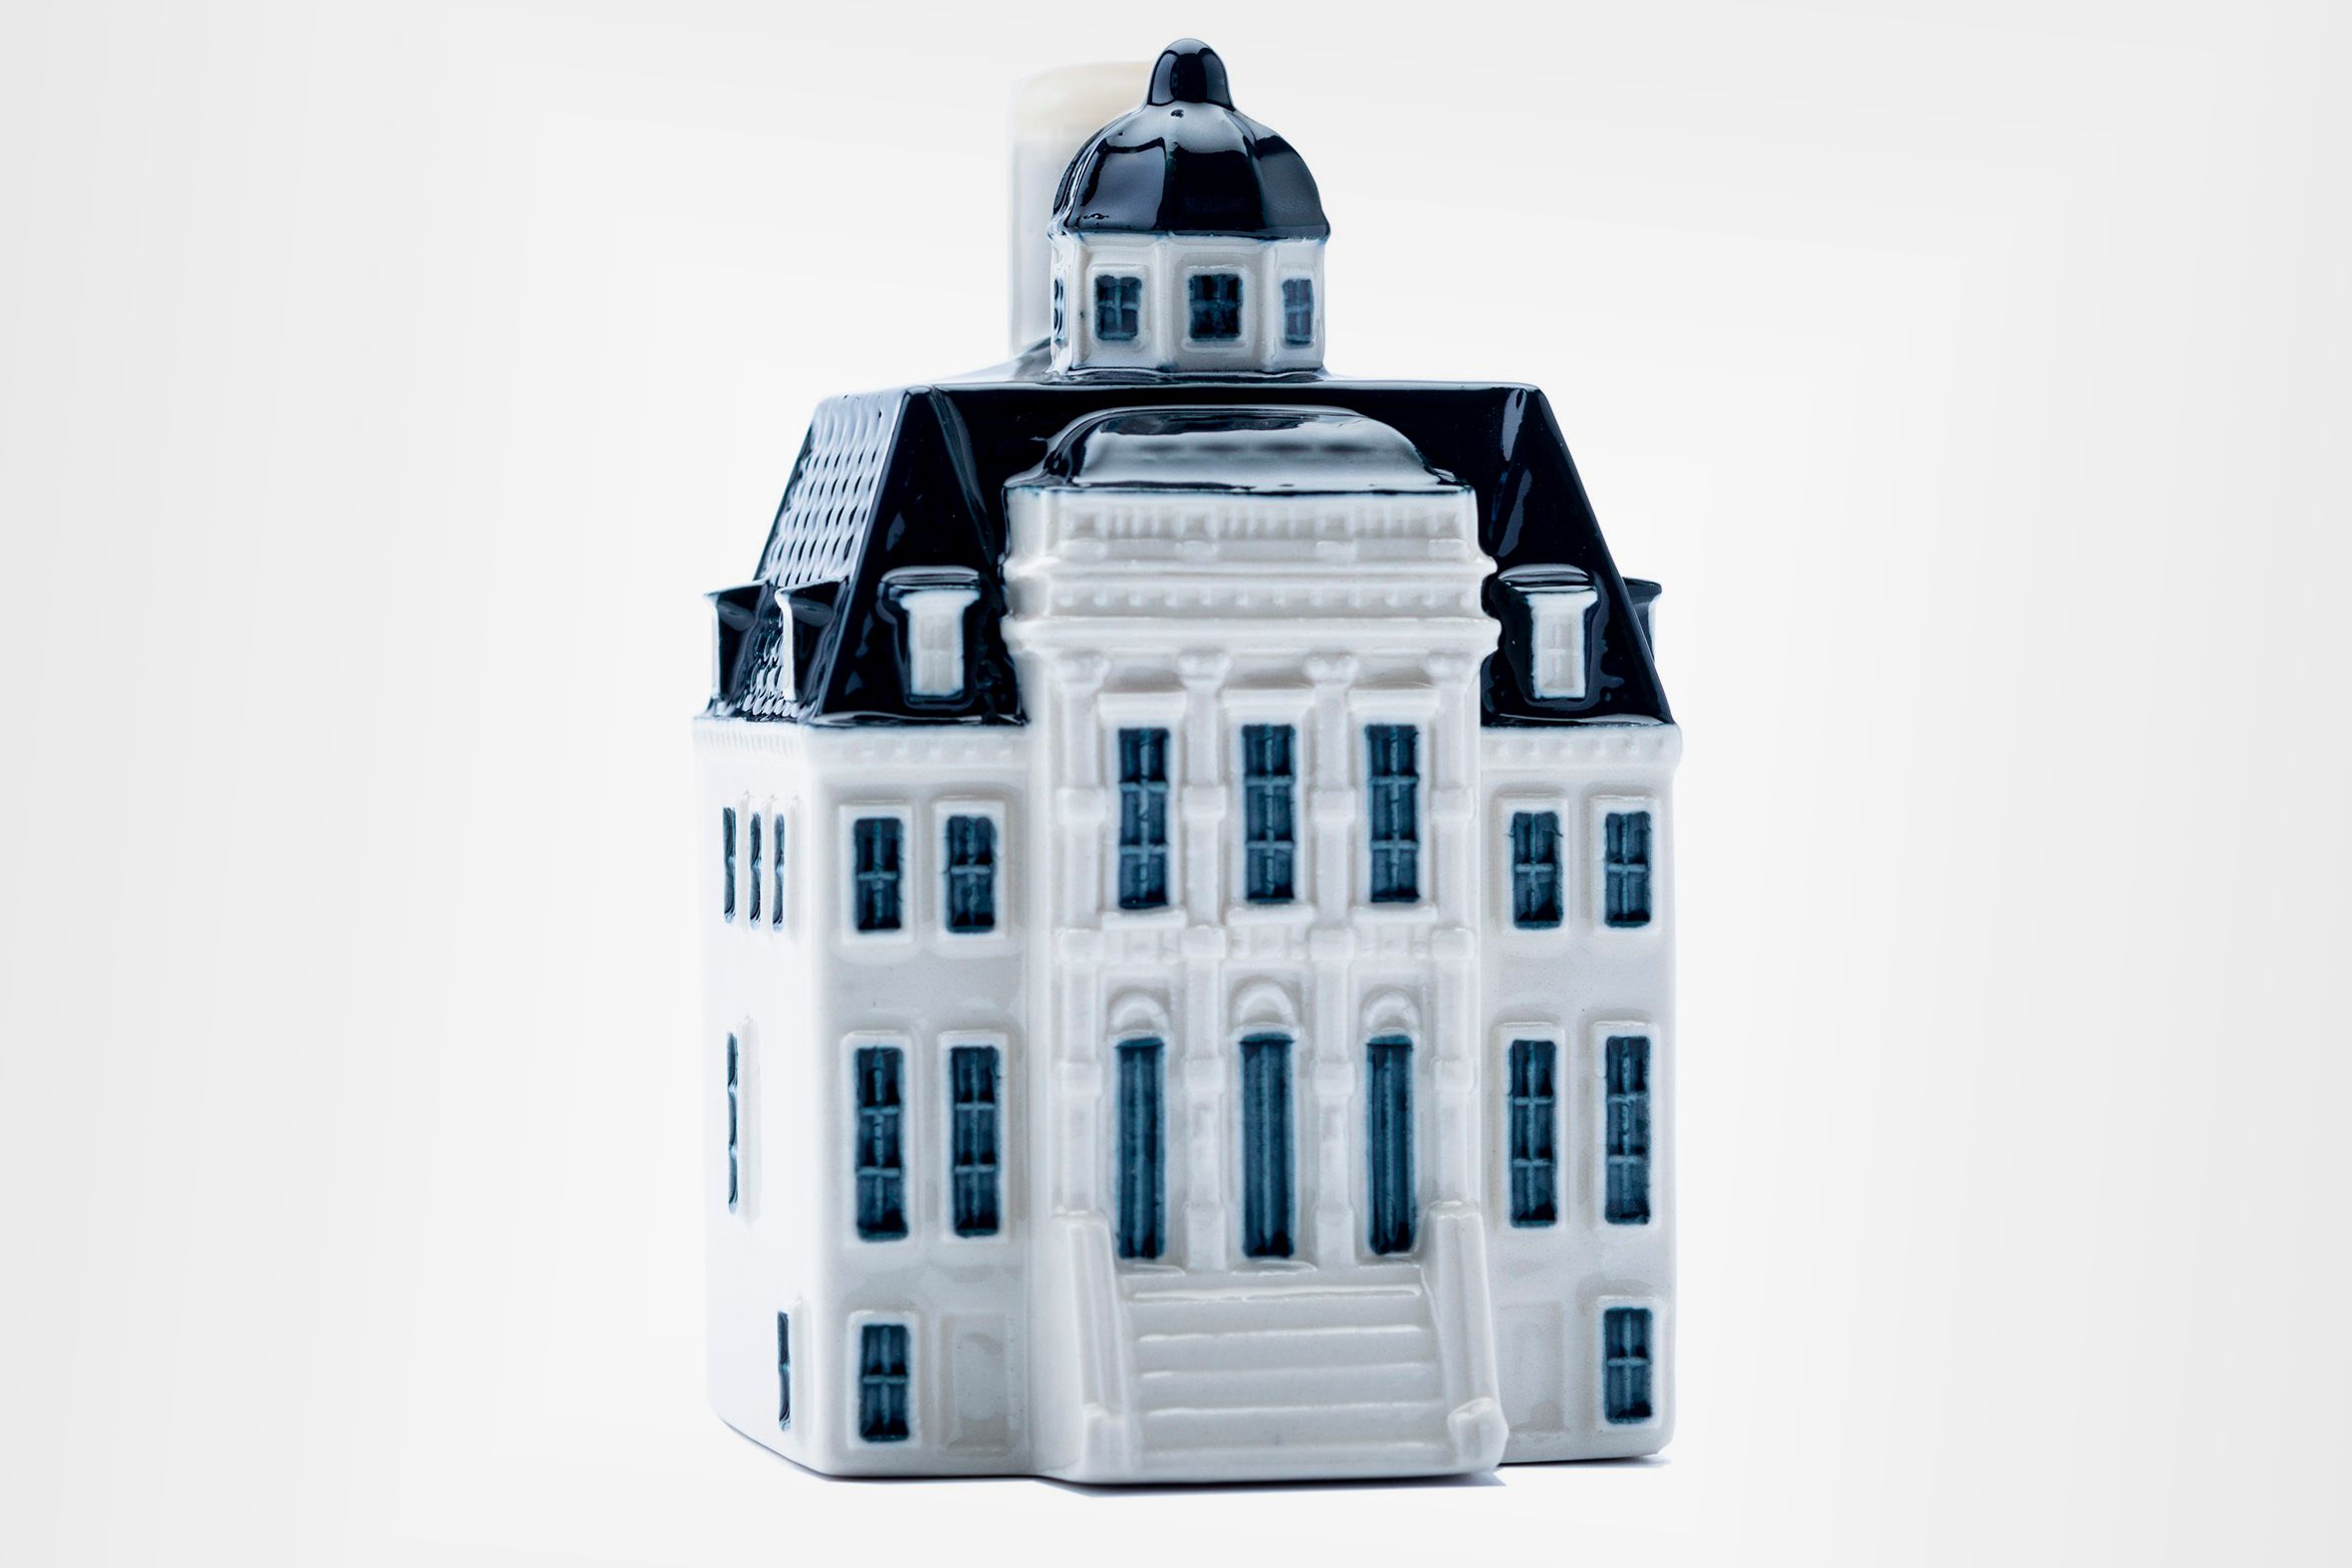 These extremely prized miniature homes play an enormous position in KLM’s historical past